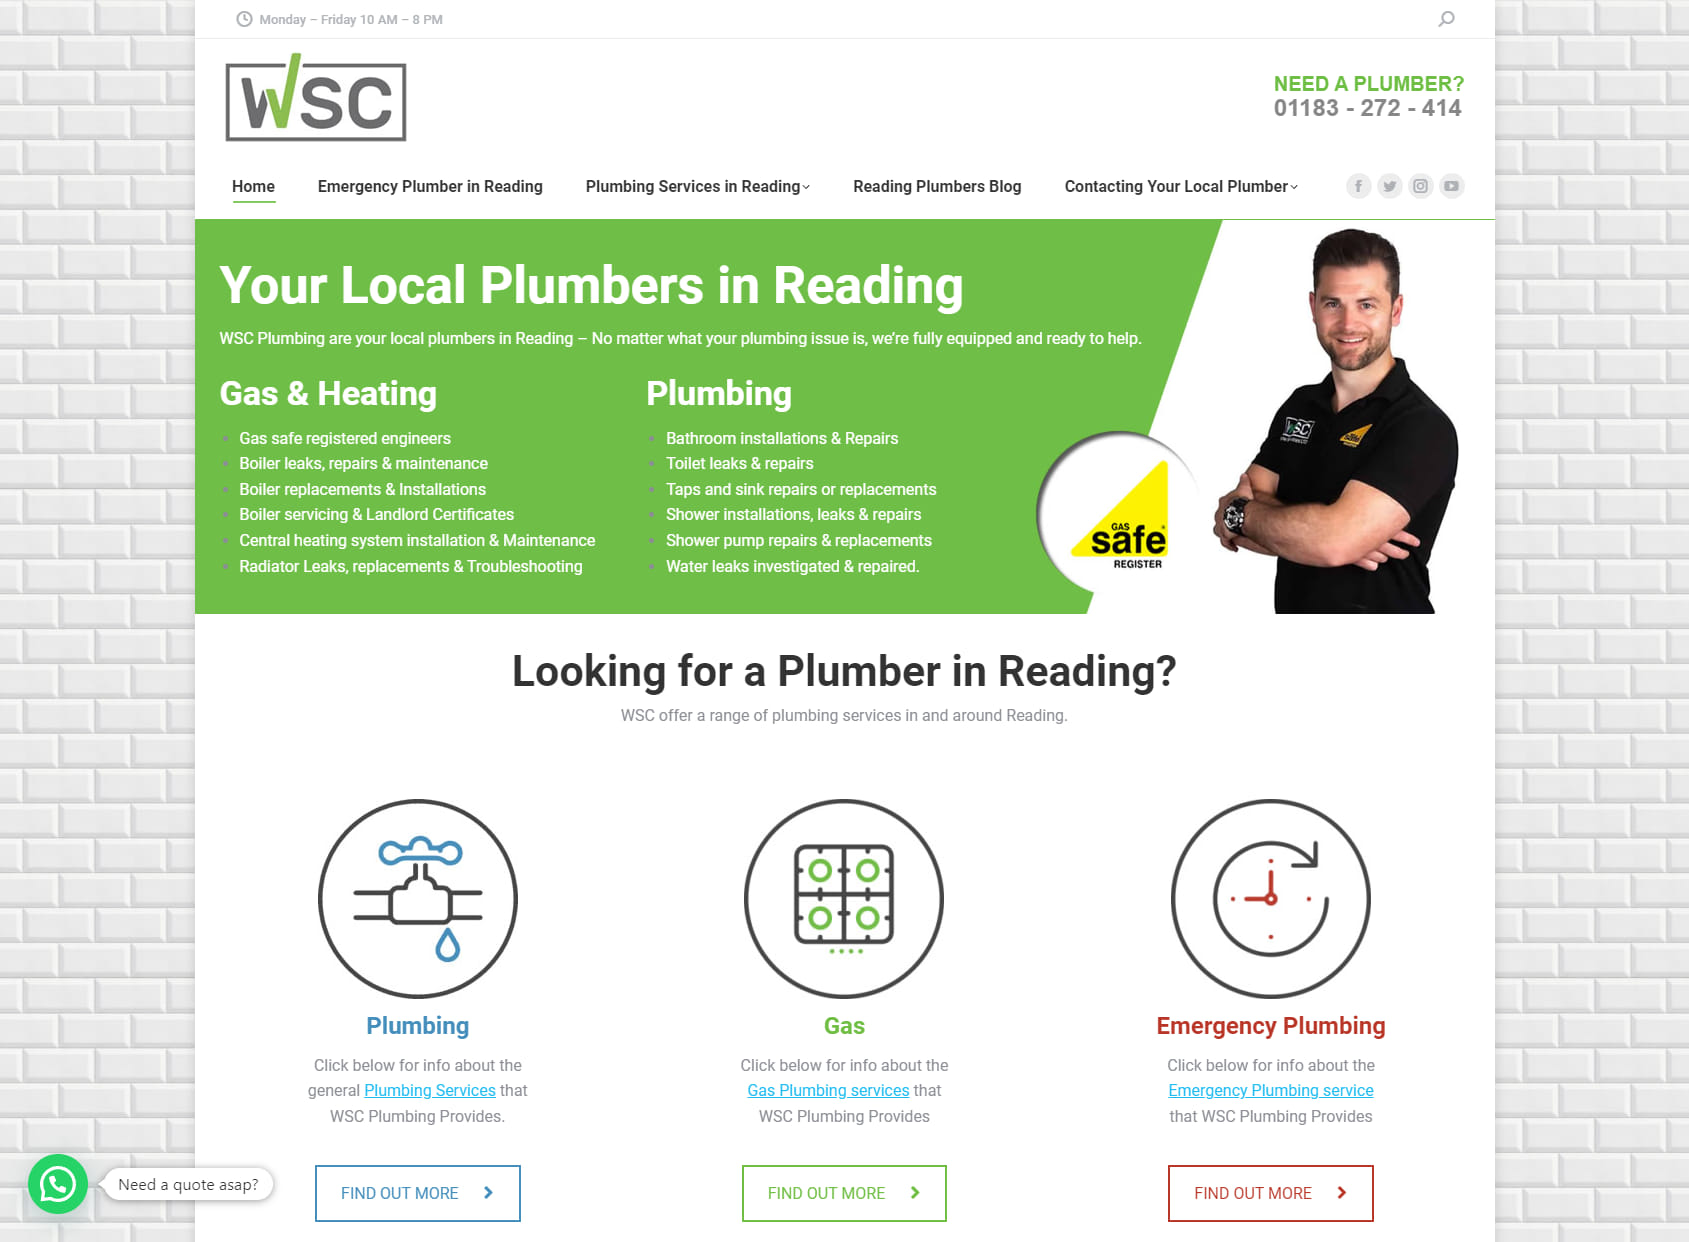 WSC Plumbing and Home services